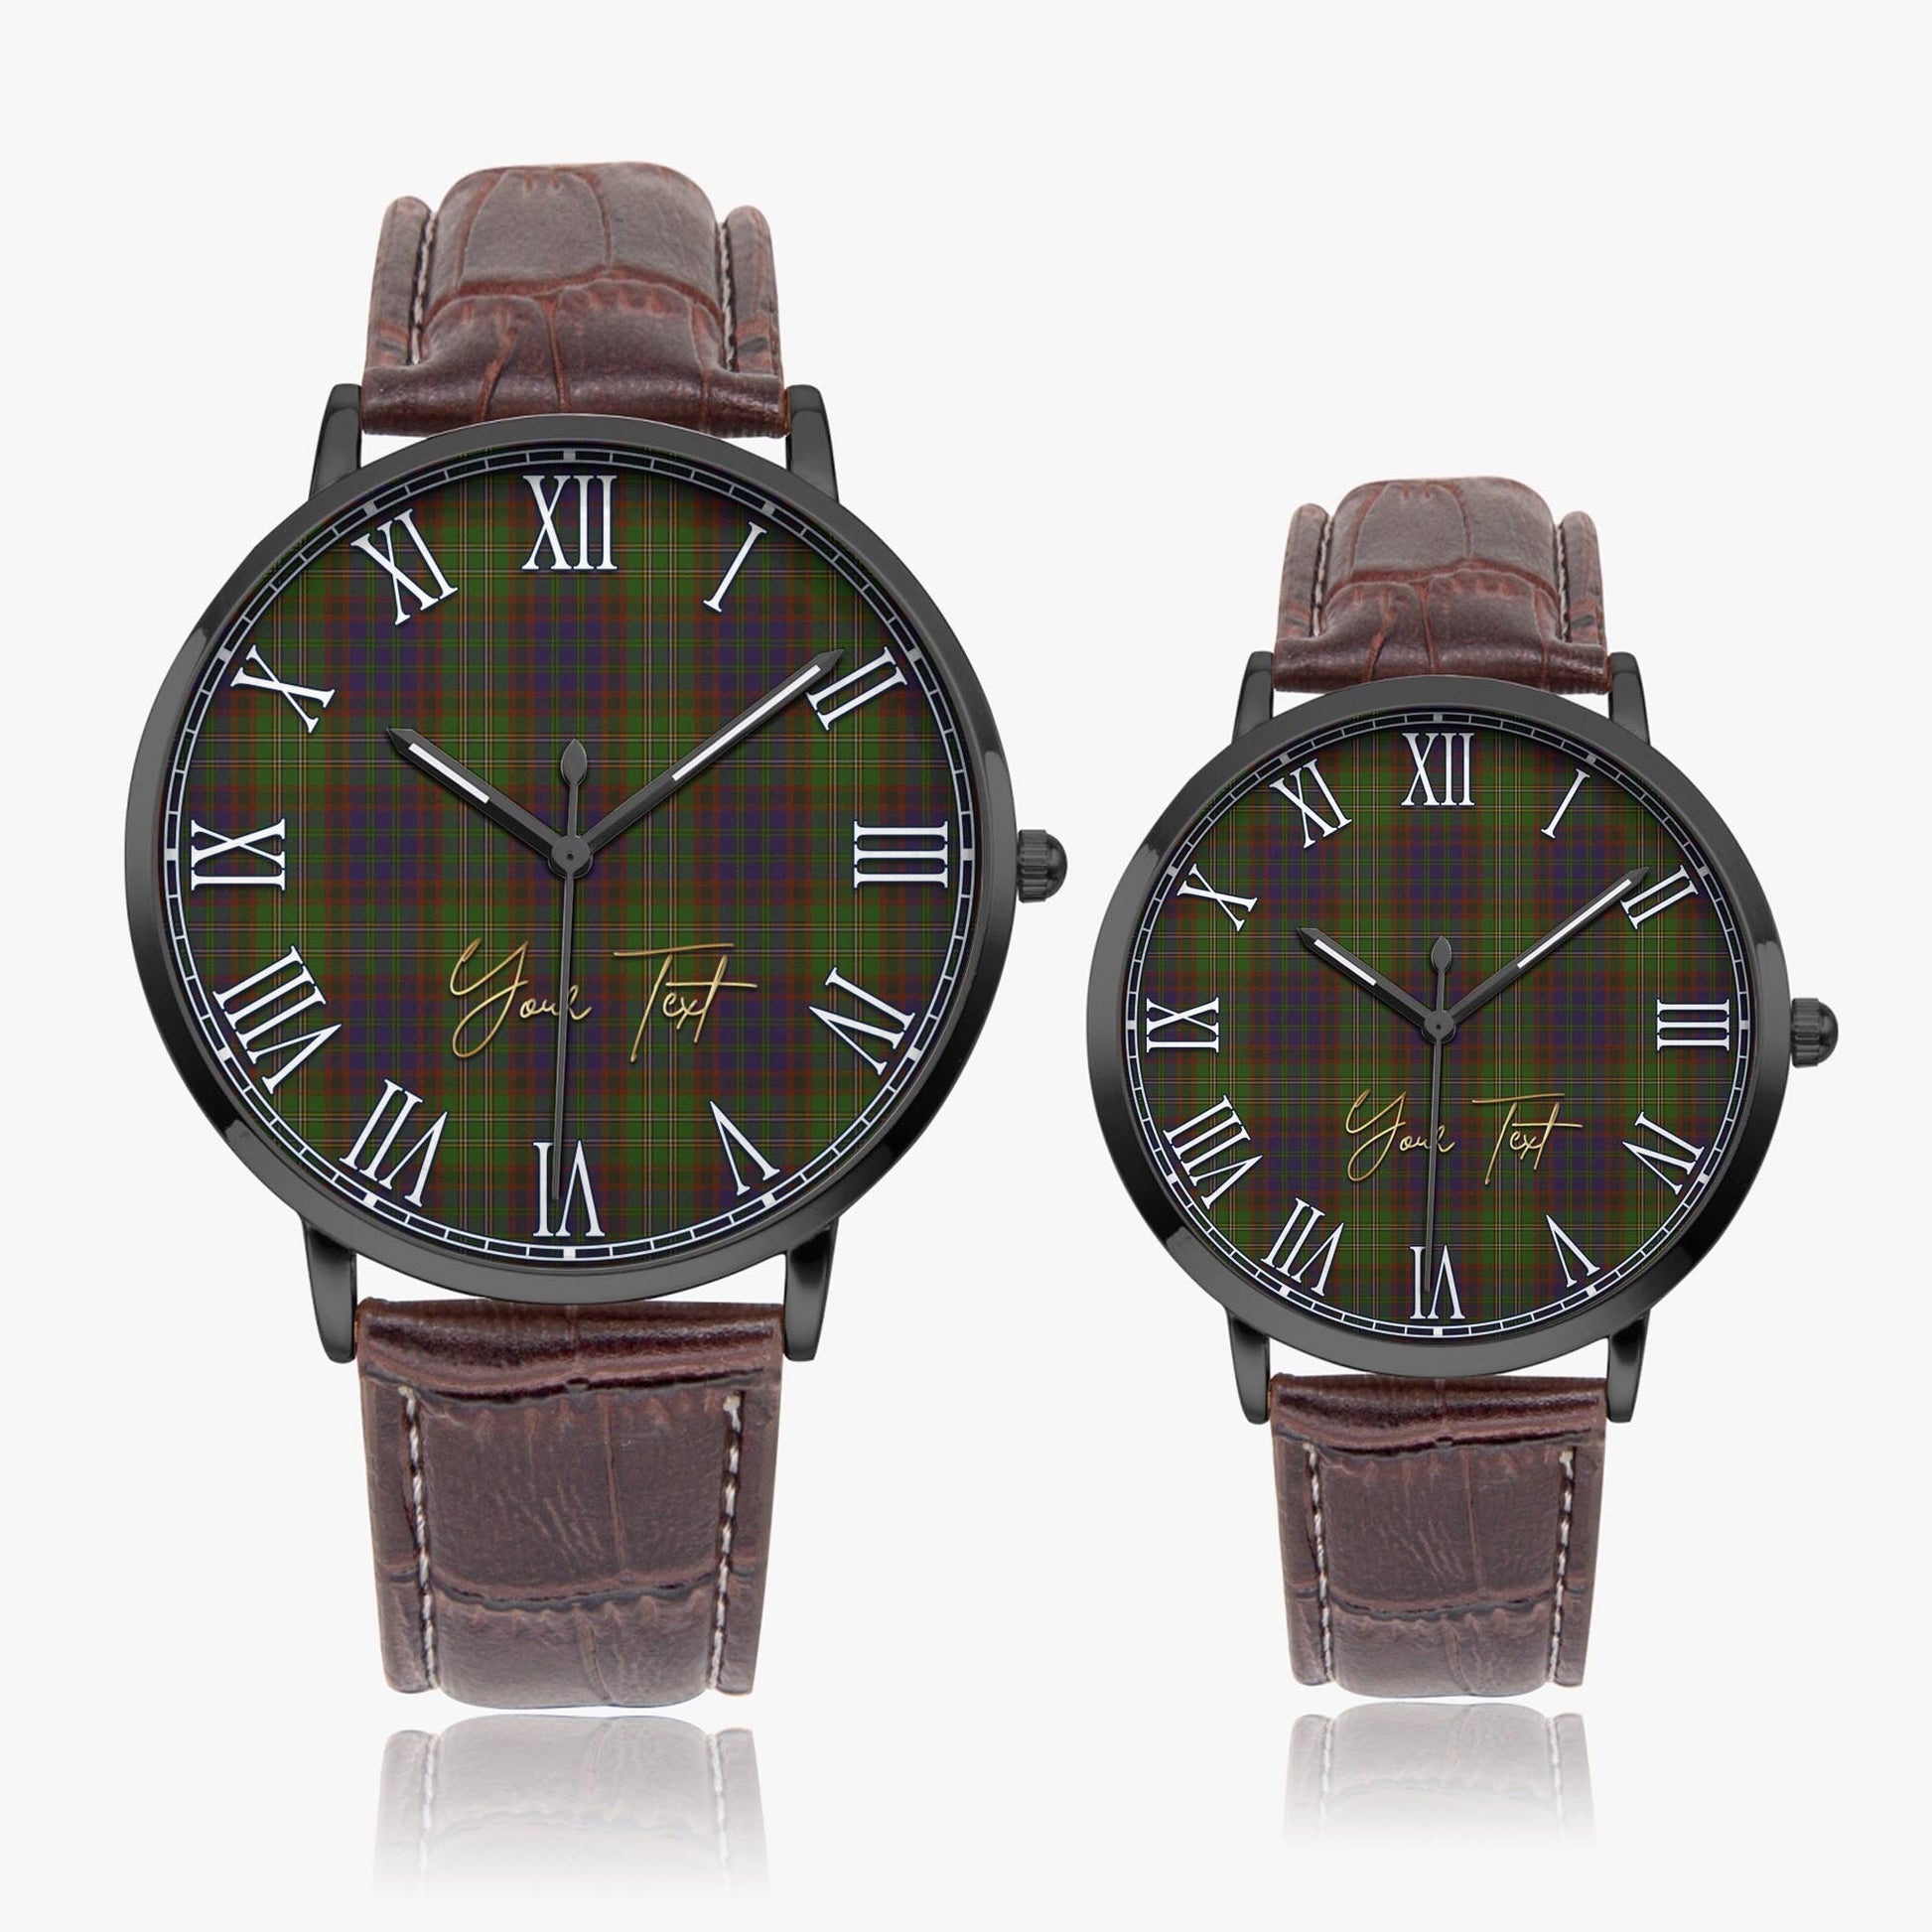 Cunningham Hunting Modern Tartan Personalized Your Text Leather Trap Quartz Watch Ultra Thin Black Case With Brown Leather Strap - Tartanvibesclothing